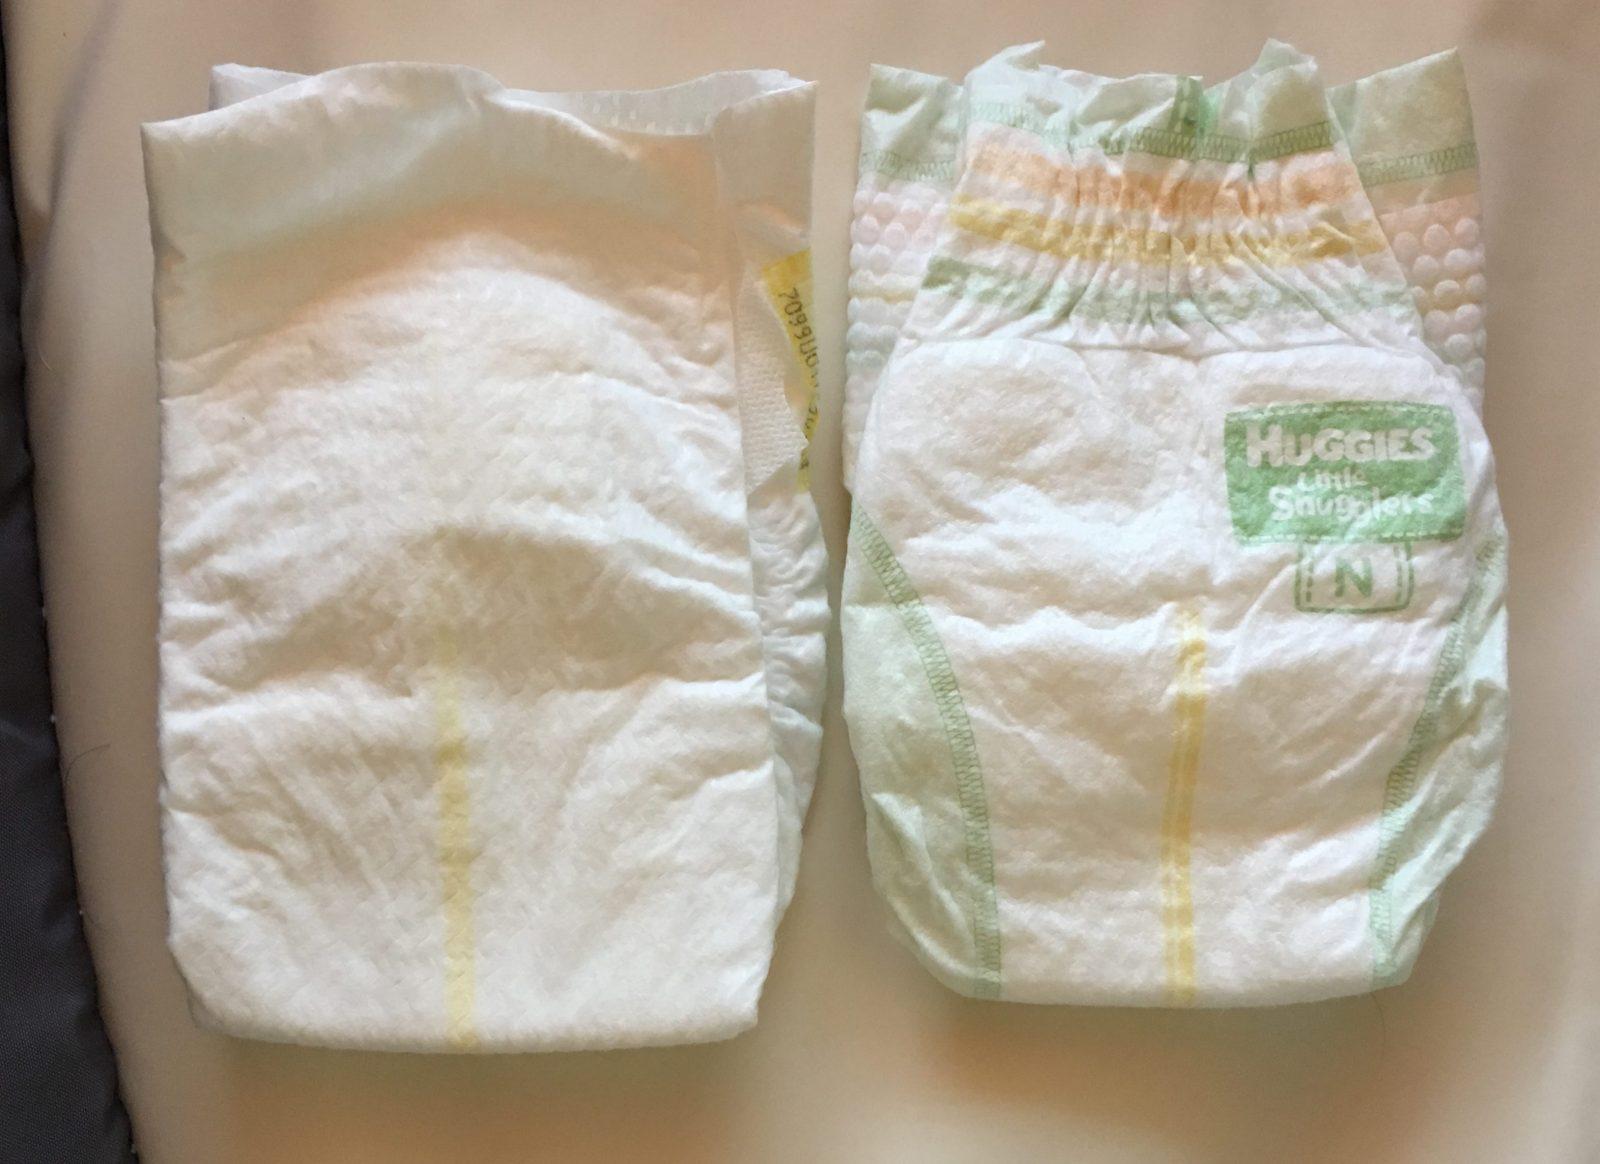 Pampers Swaddlers vs Huggies Little Snugglers – Which Brand is Better